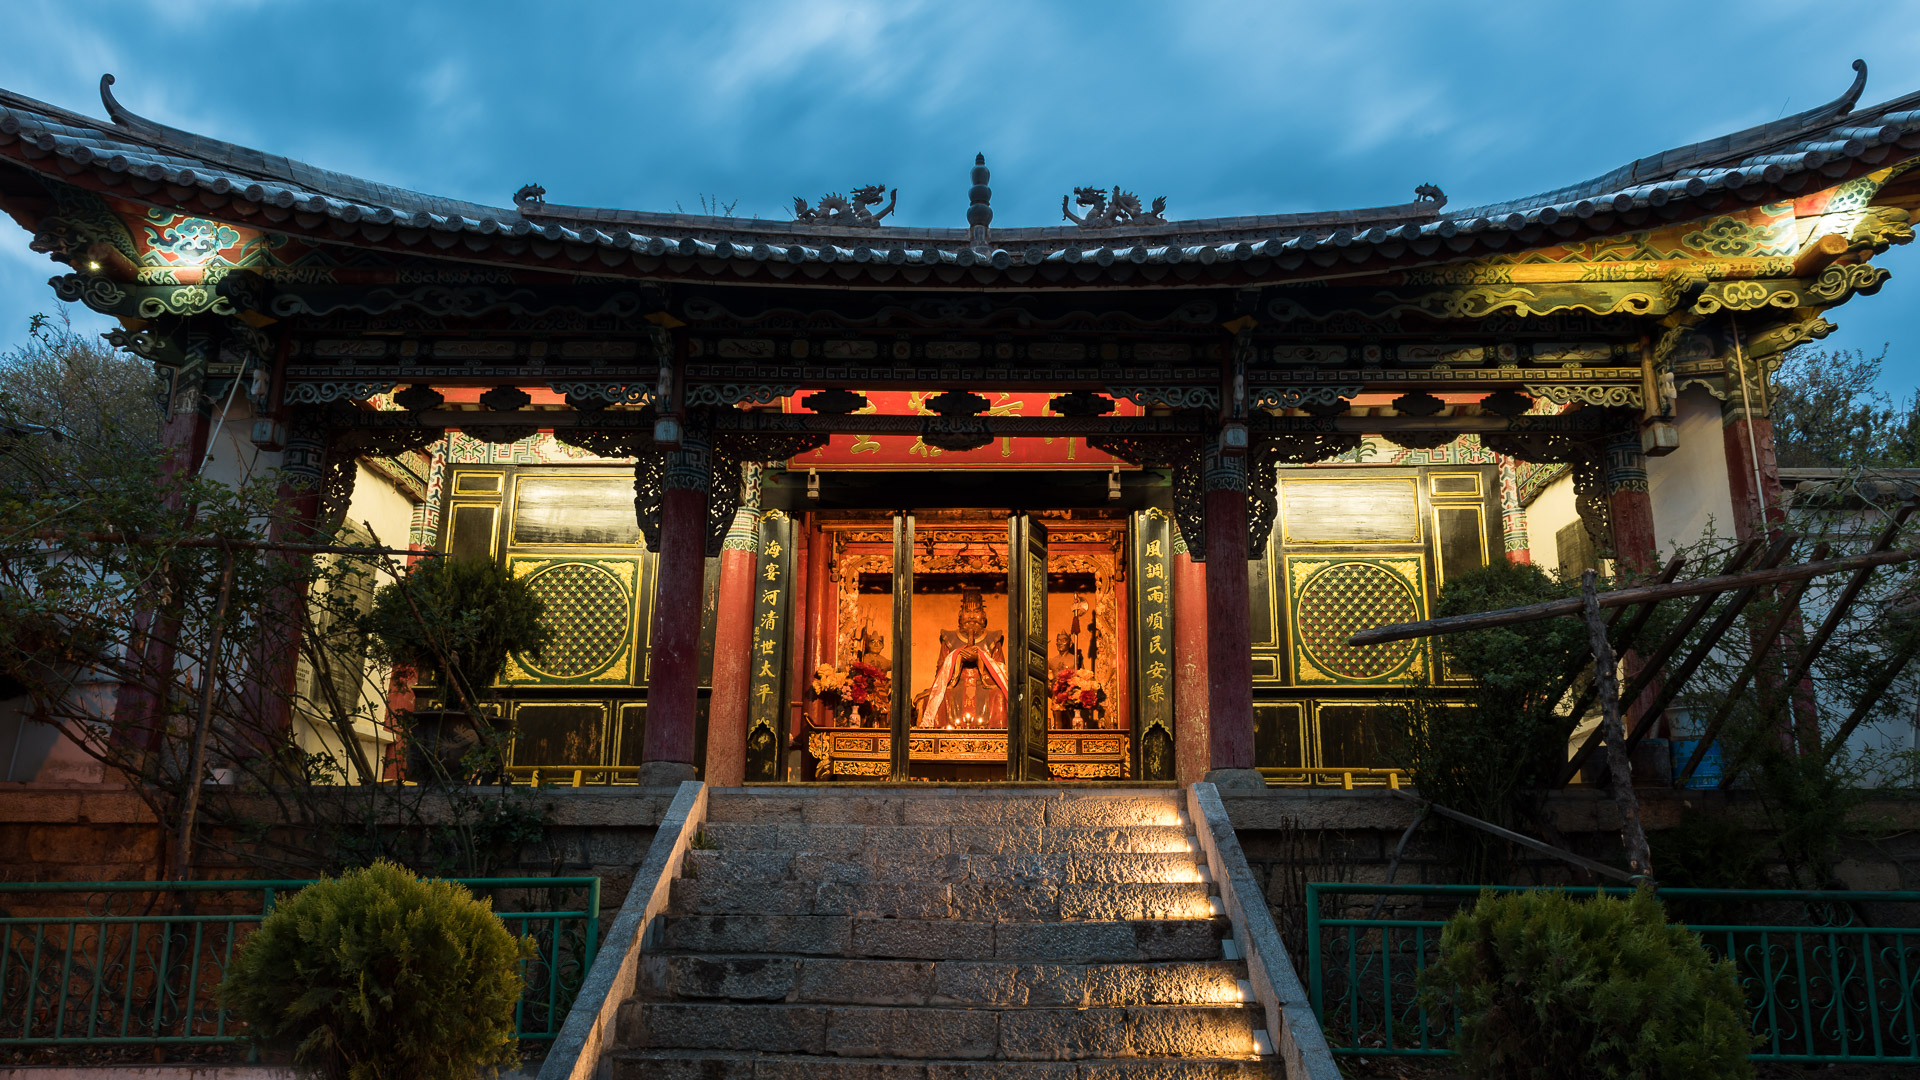 A Buddhist temple in old town Shangri-La.